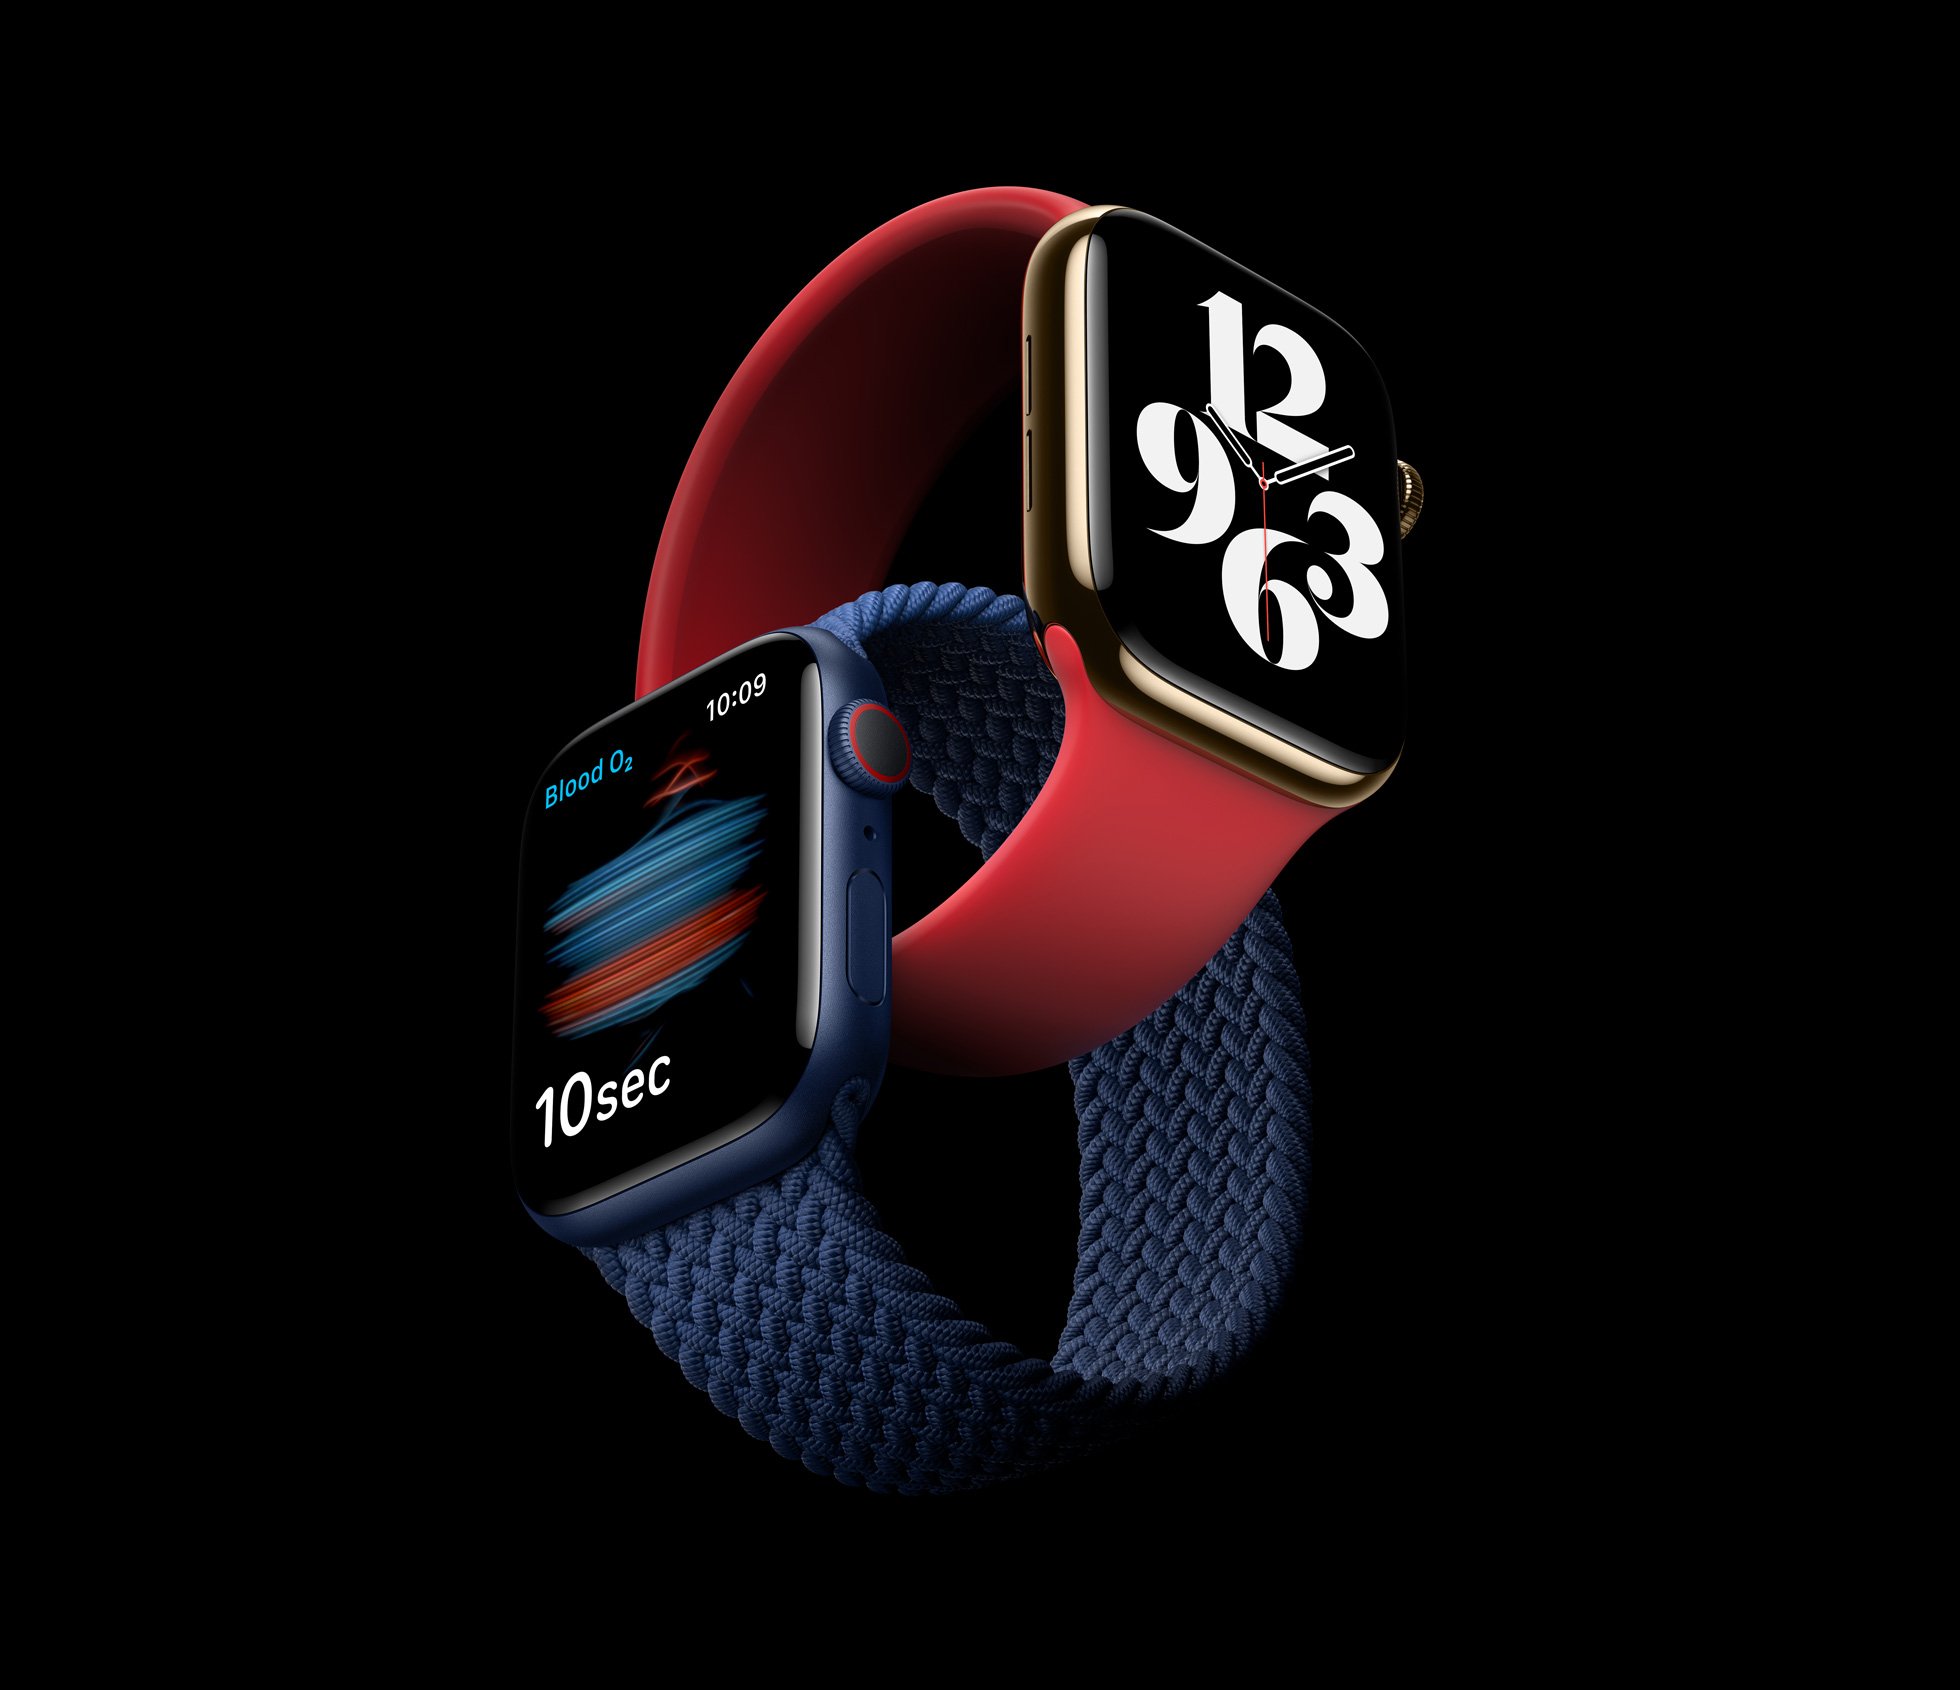 Apple Delivers Apple Watch Series 6